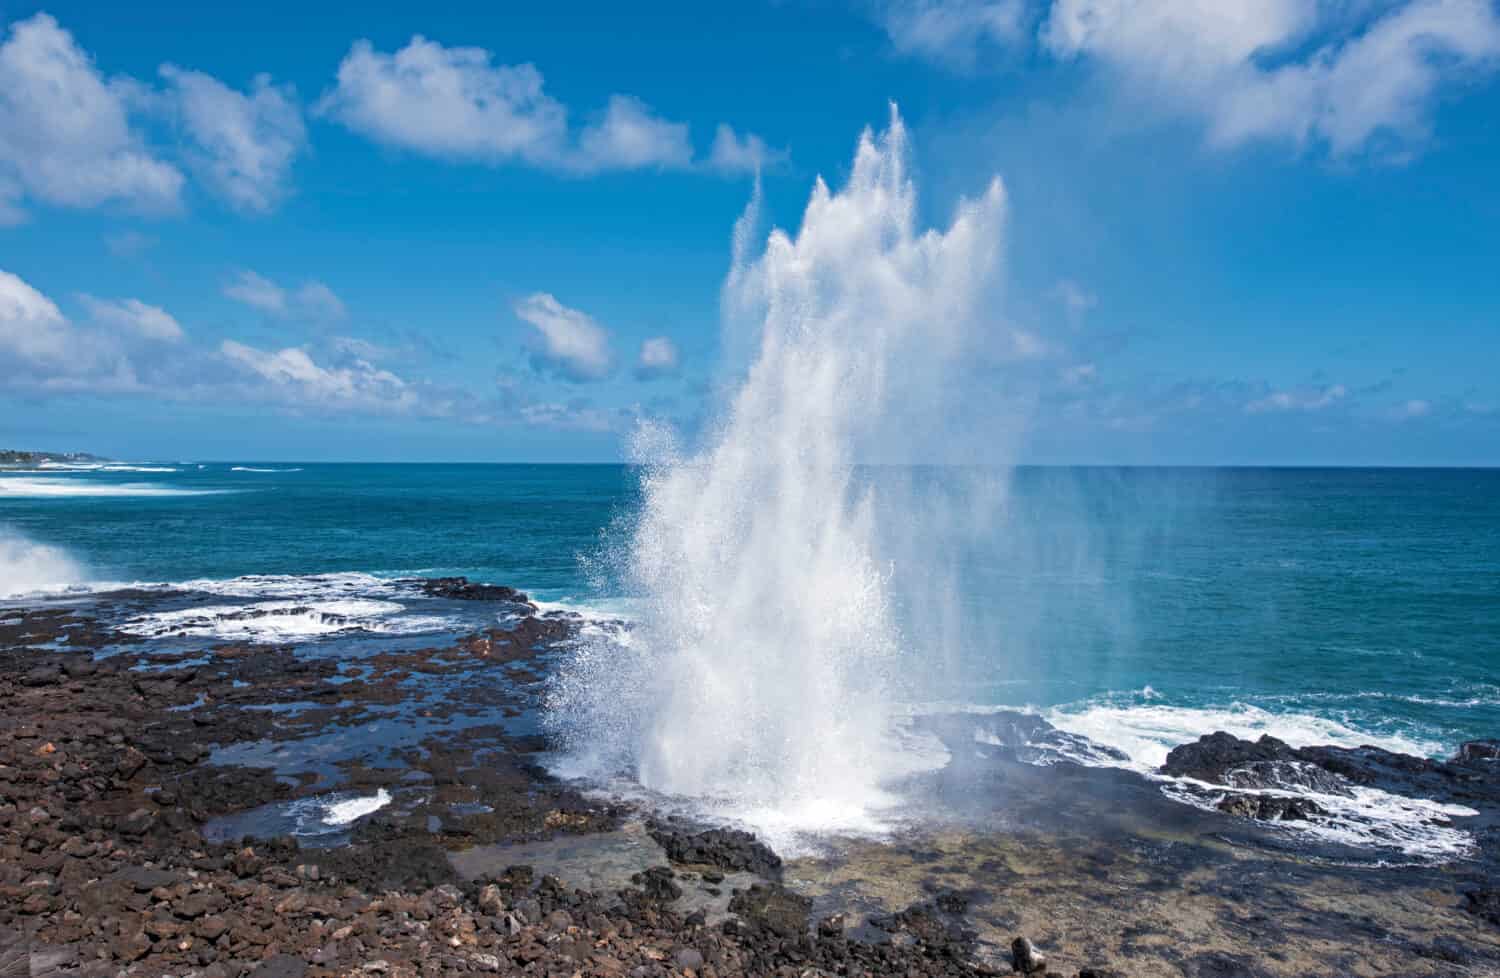 Spouting Horn is off the southern coast of Kauai in the Koloa district and is known for its crashing waves and large sprays of water.